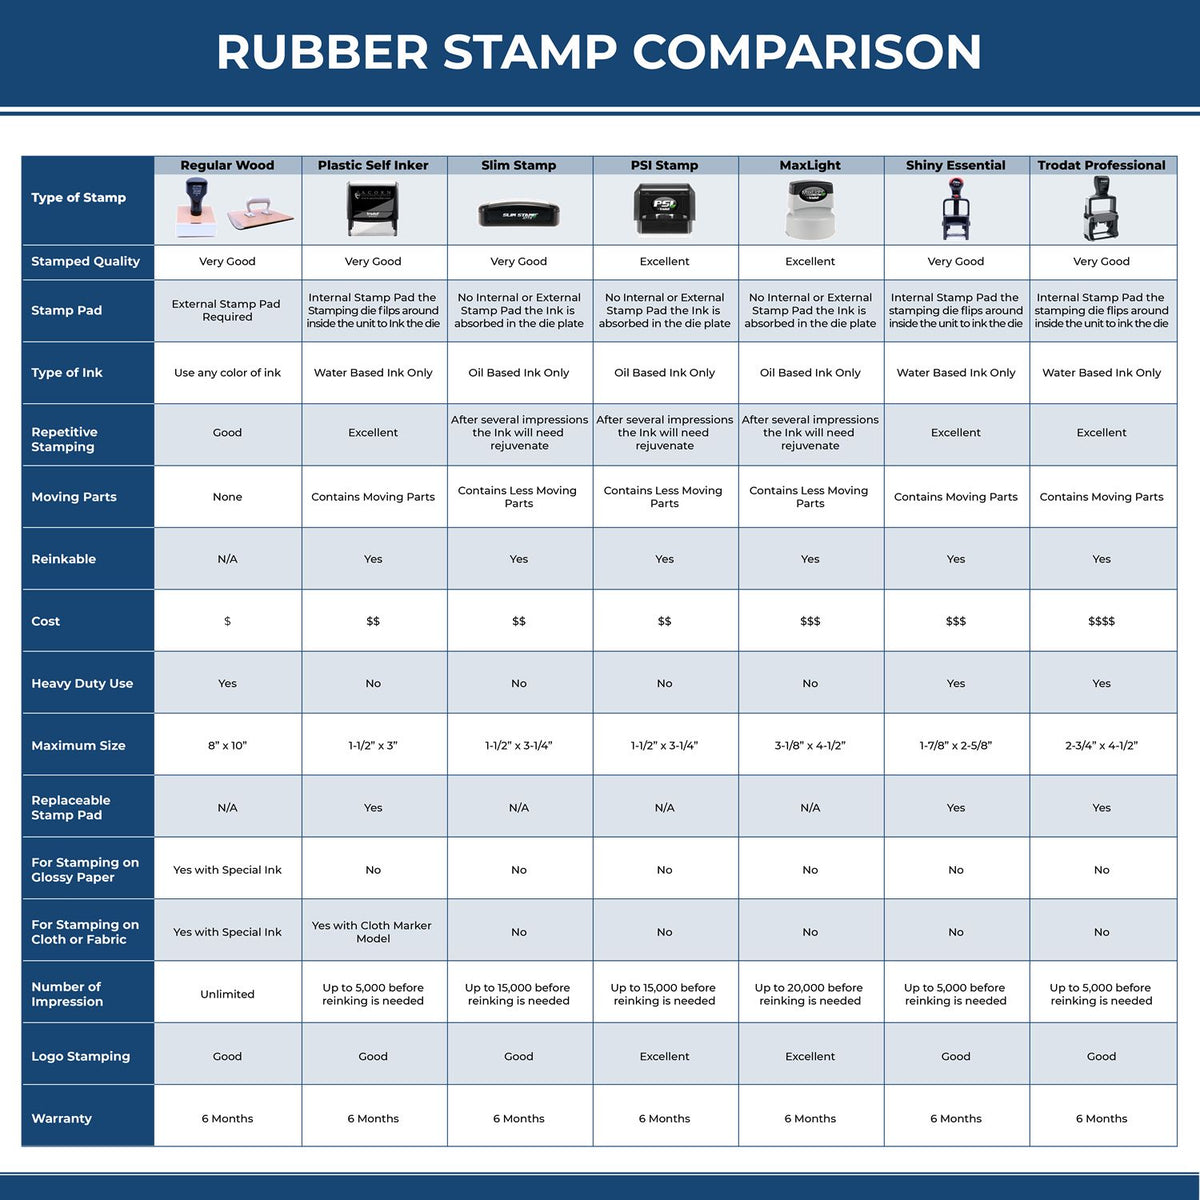 A comparison chart for the different types of mount models available for the Slim Pre-Inked Washington Landscape Architect Seal Stamp.